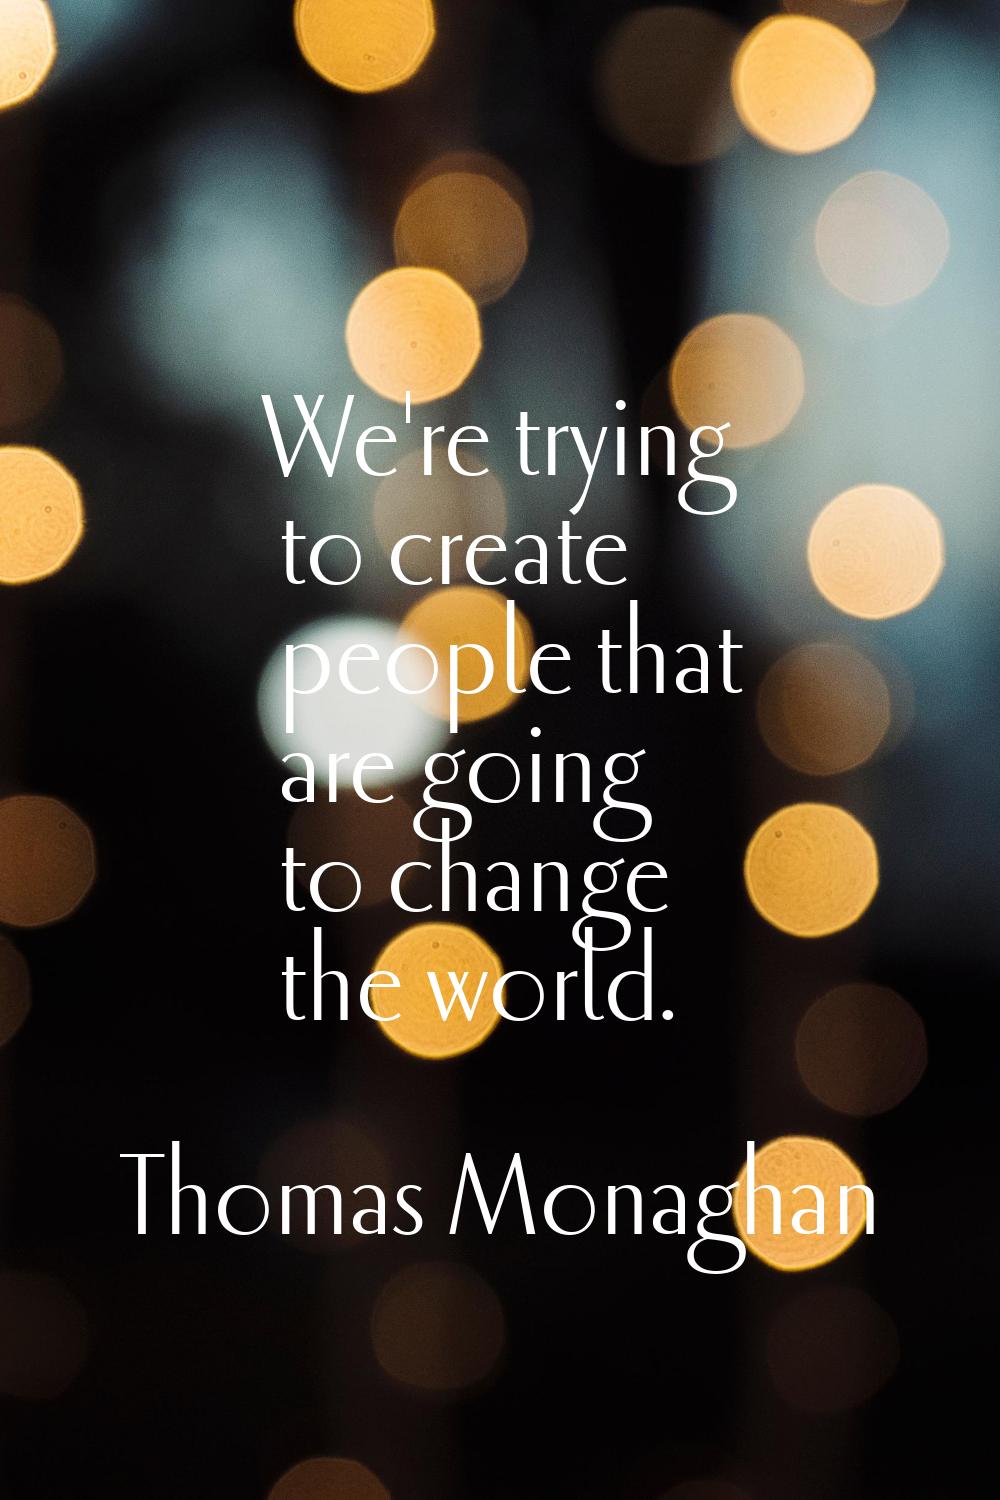 We're trying to create people that are going to change the world.